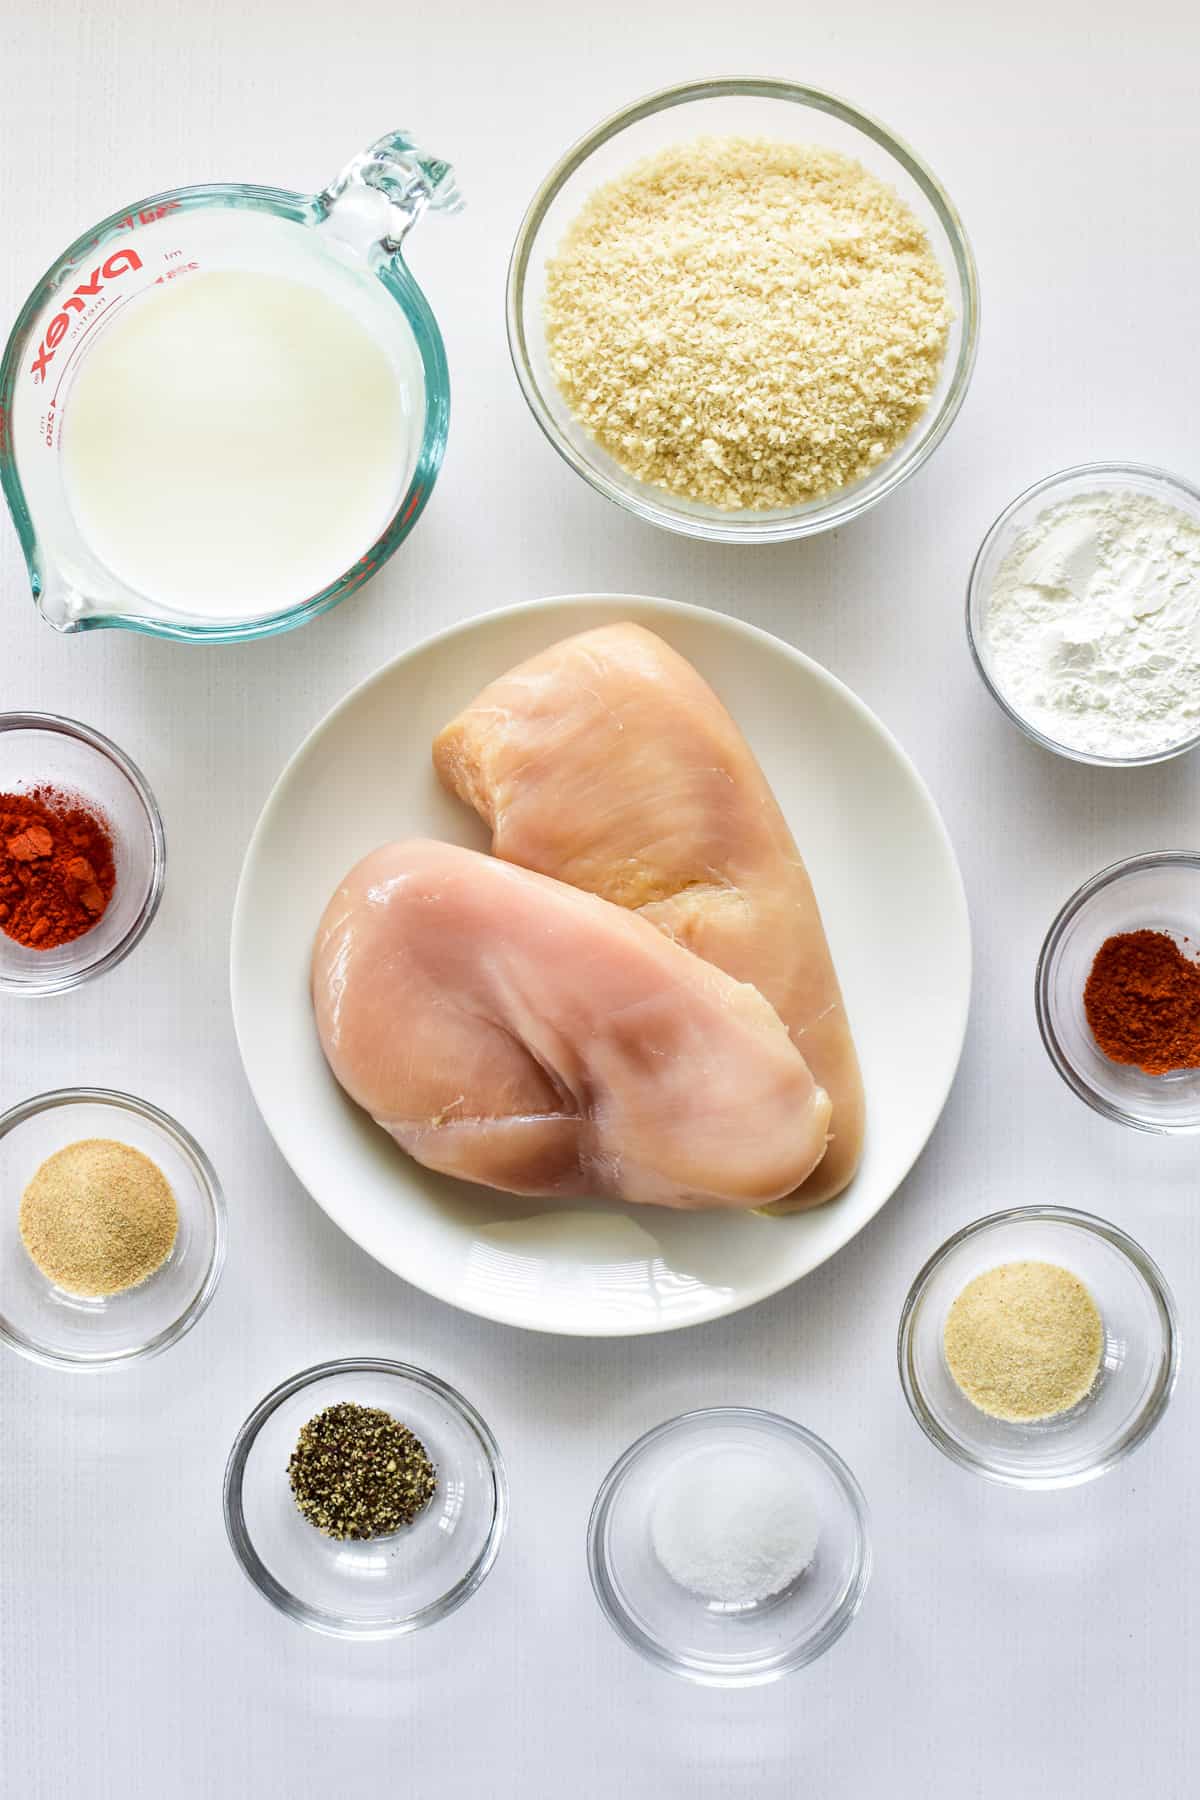 Ingredients for Crispy Chicken Nuggets